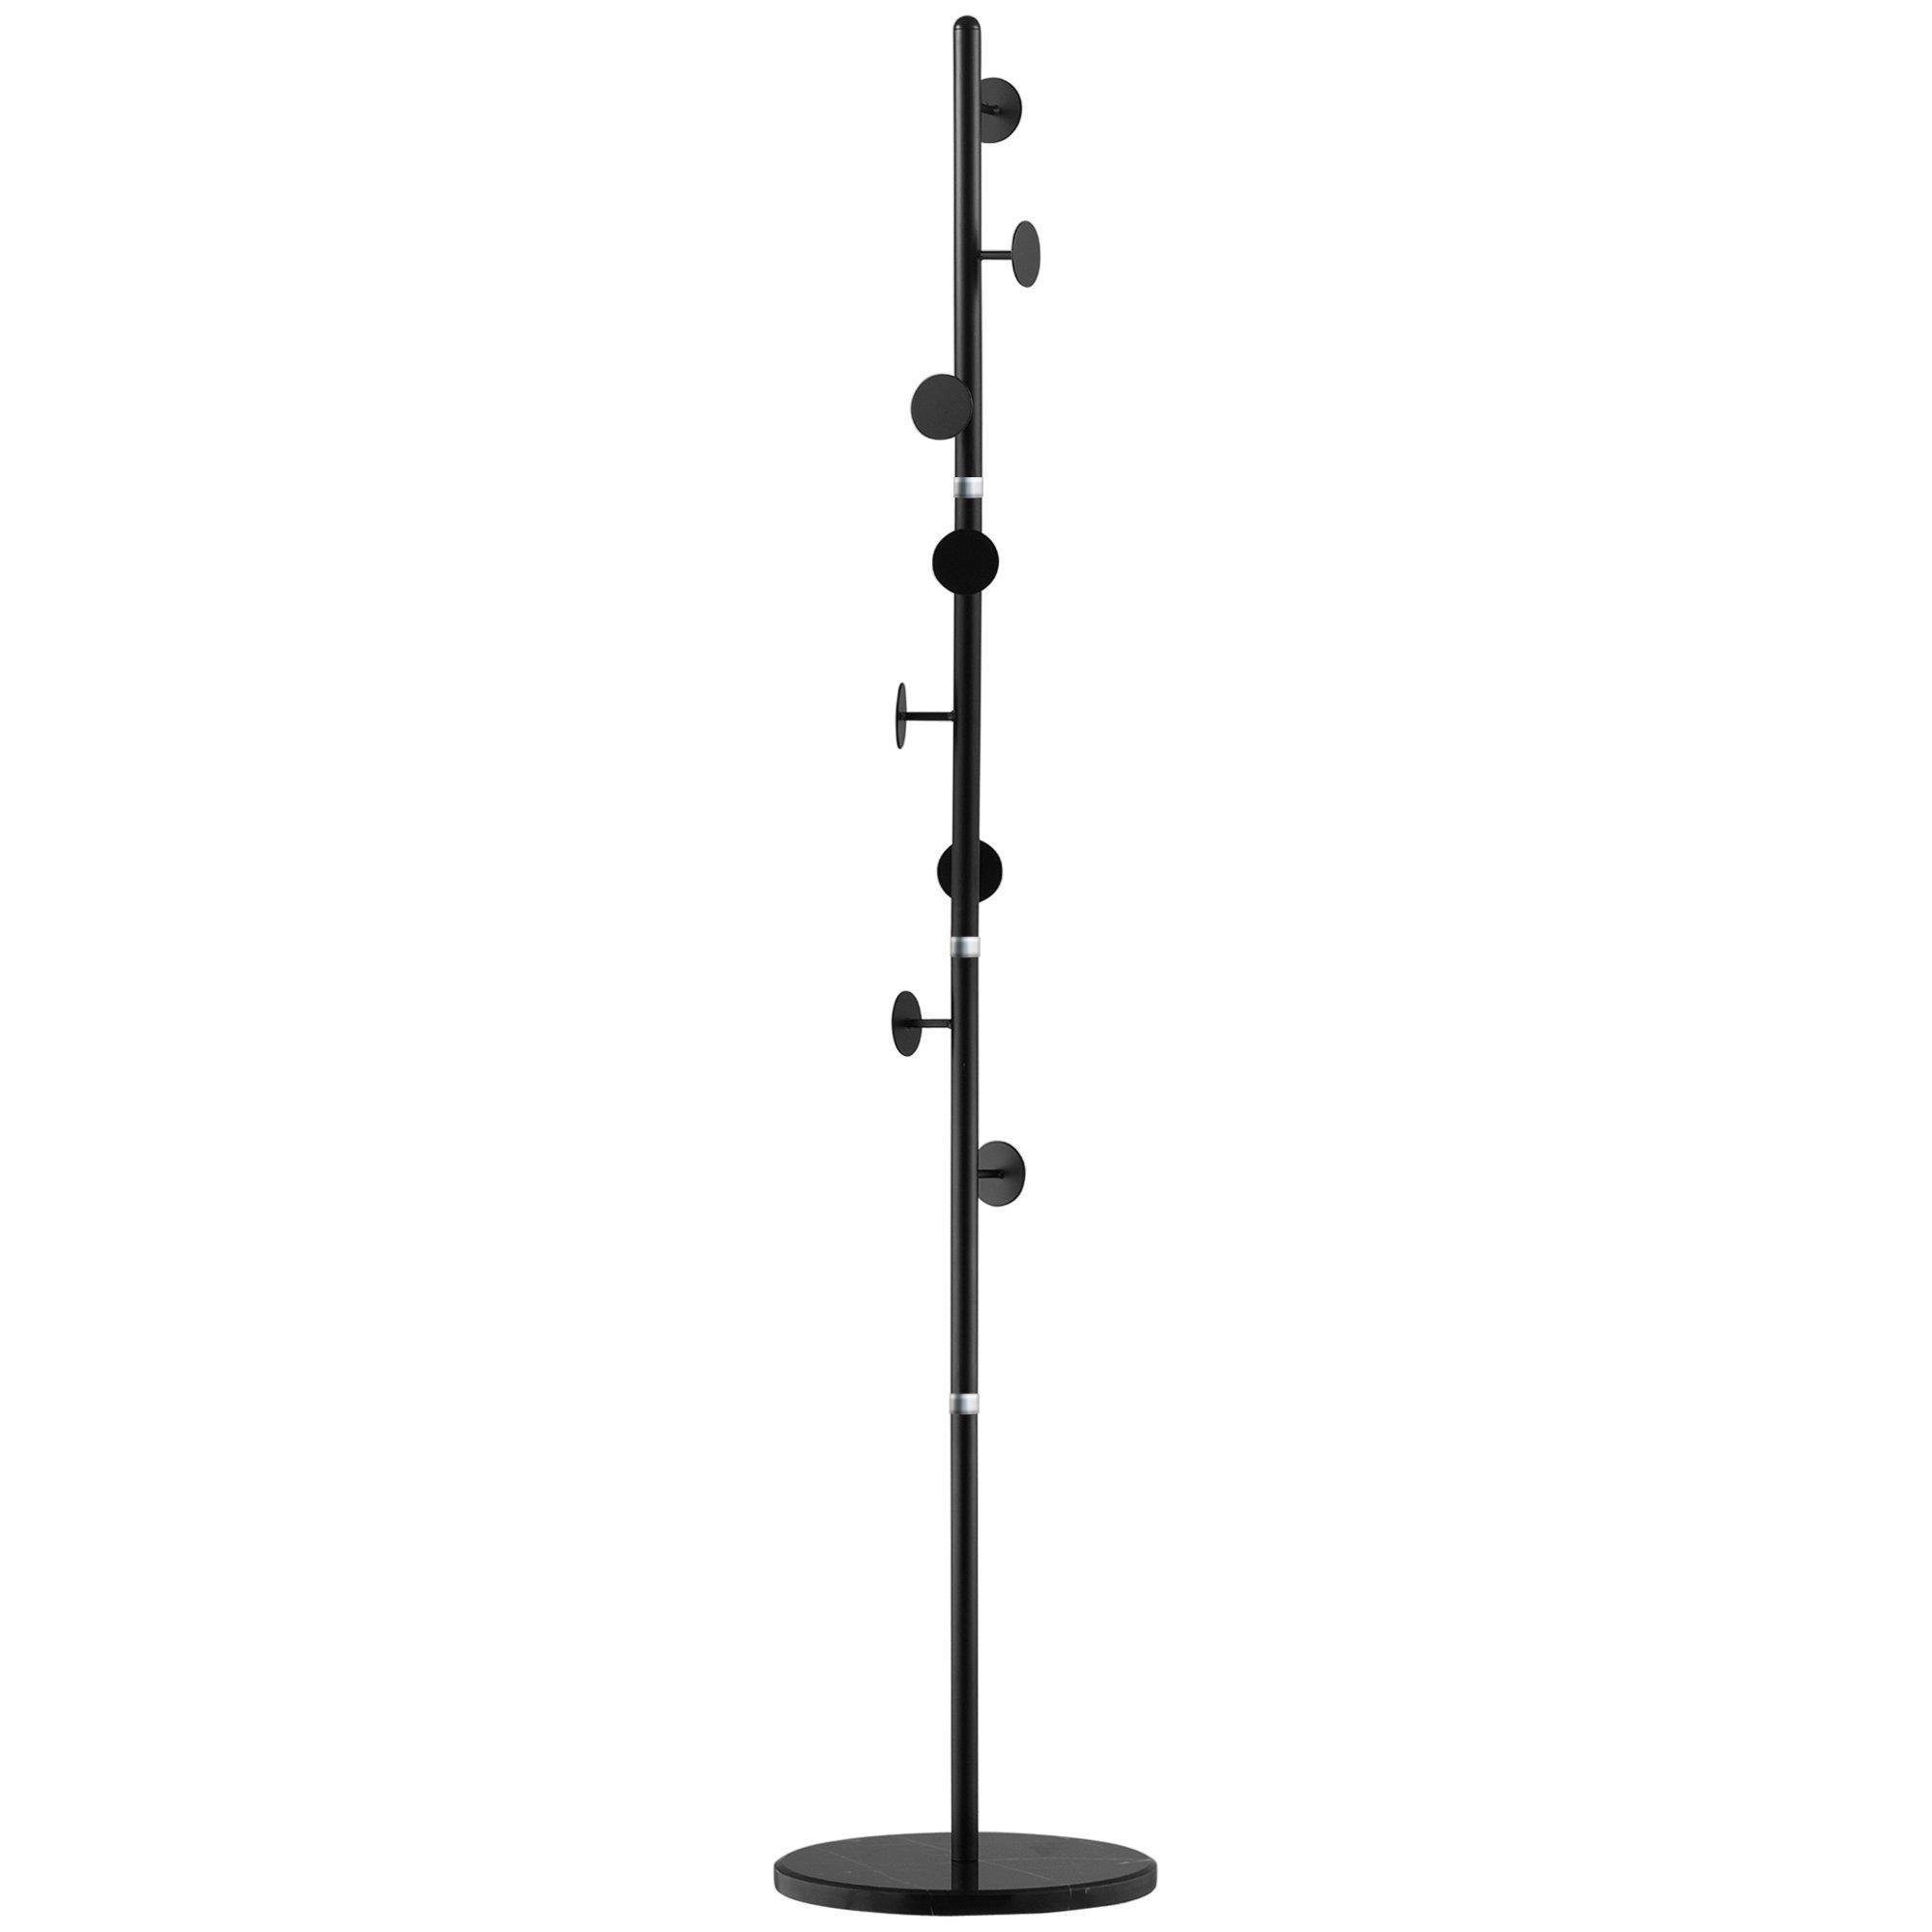 Steel Coat Rack Hall Tree with 8 Hooks Marble Base for Clothes Hats - image 1